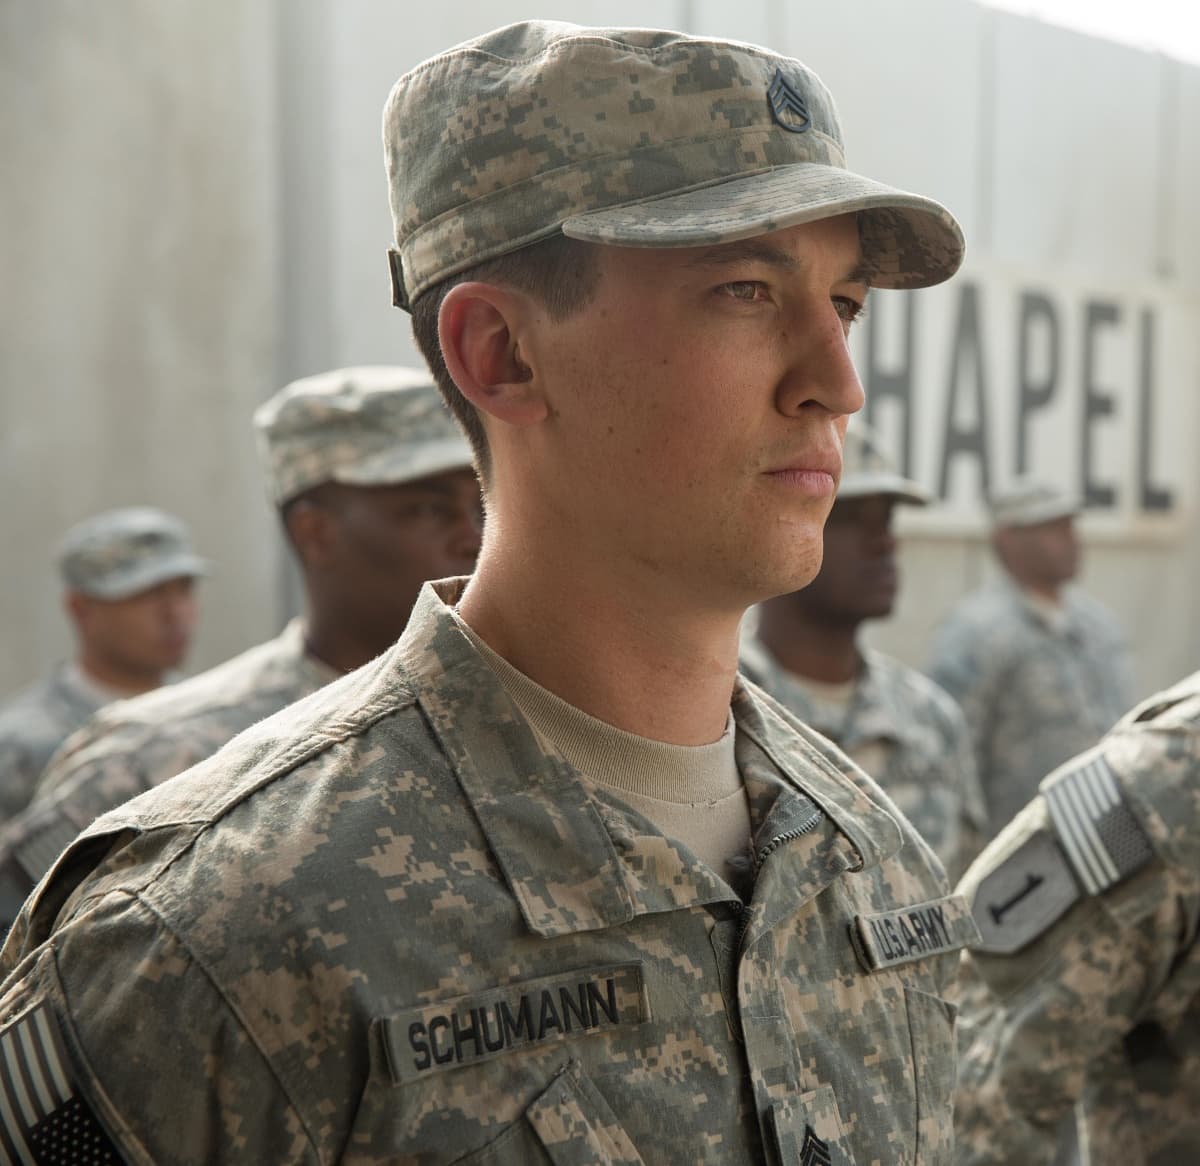 Miles Teller as Adam Schumann in the 2017 biographical war drama film Thank You for Your Service